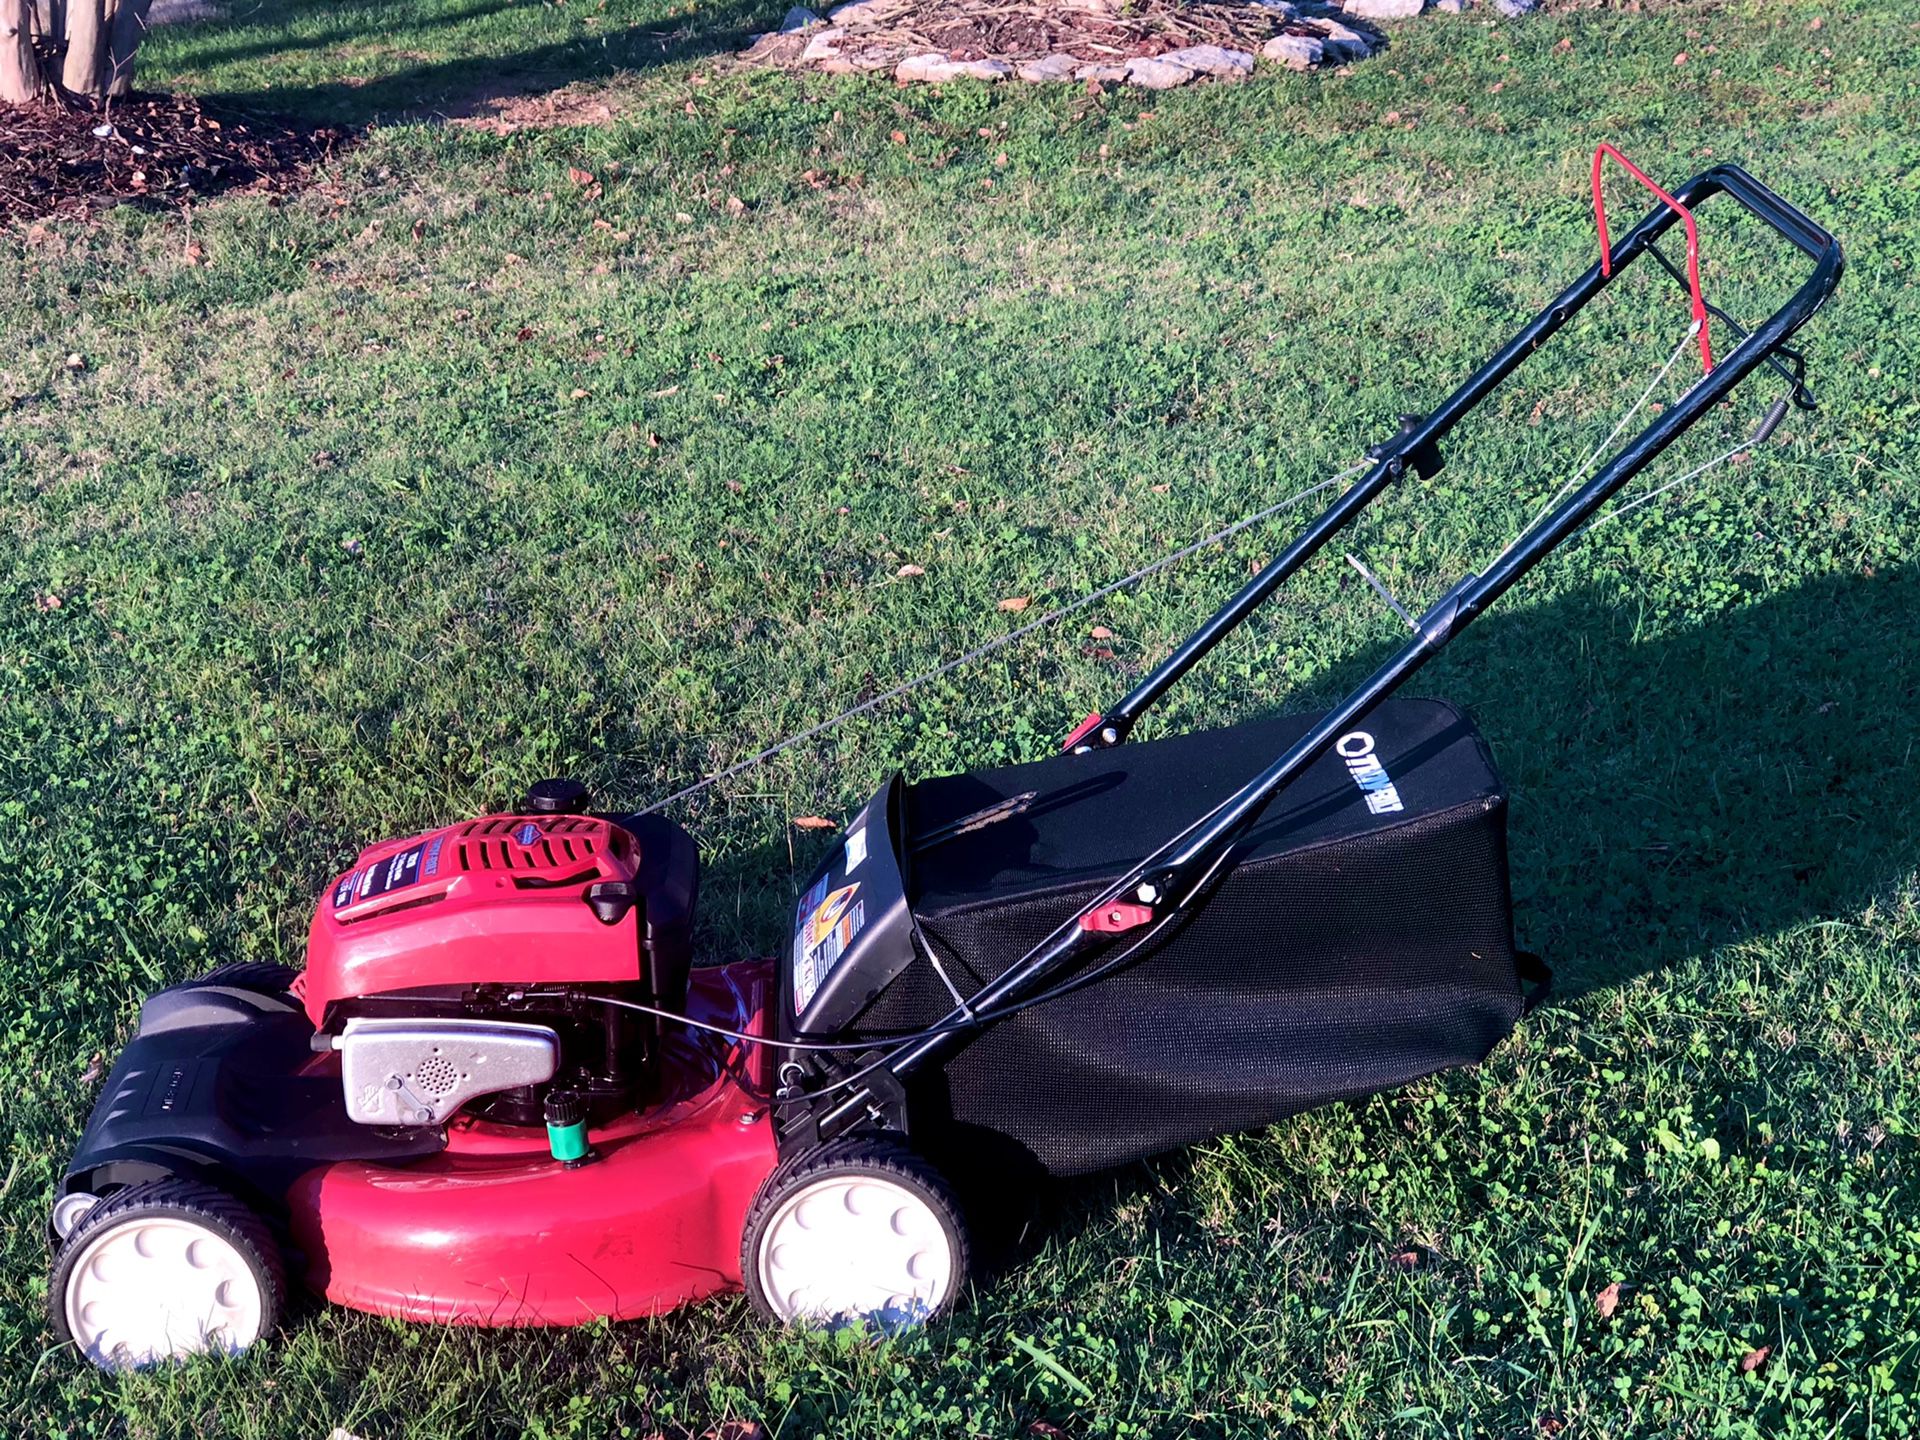 Troy Bilt TB210 725EX 190cc Self-propelled Lawnmower With Bag 21” cut In like new condition